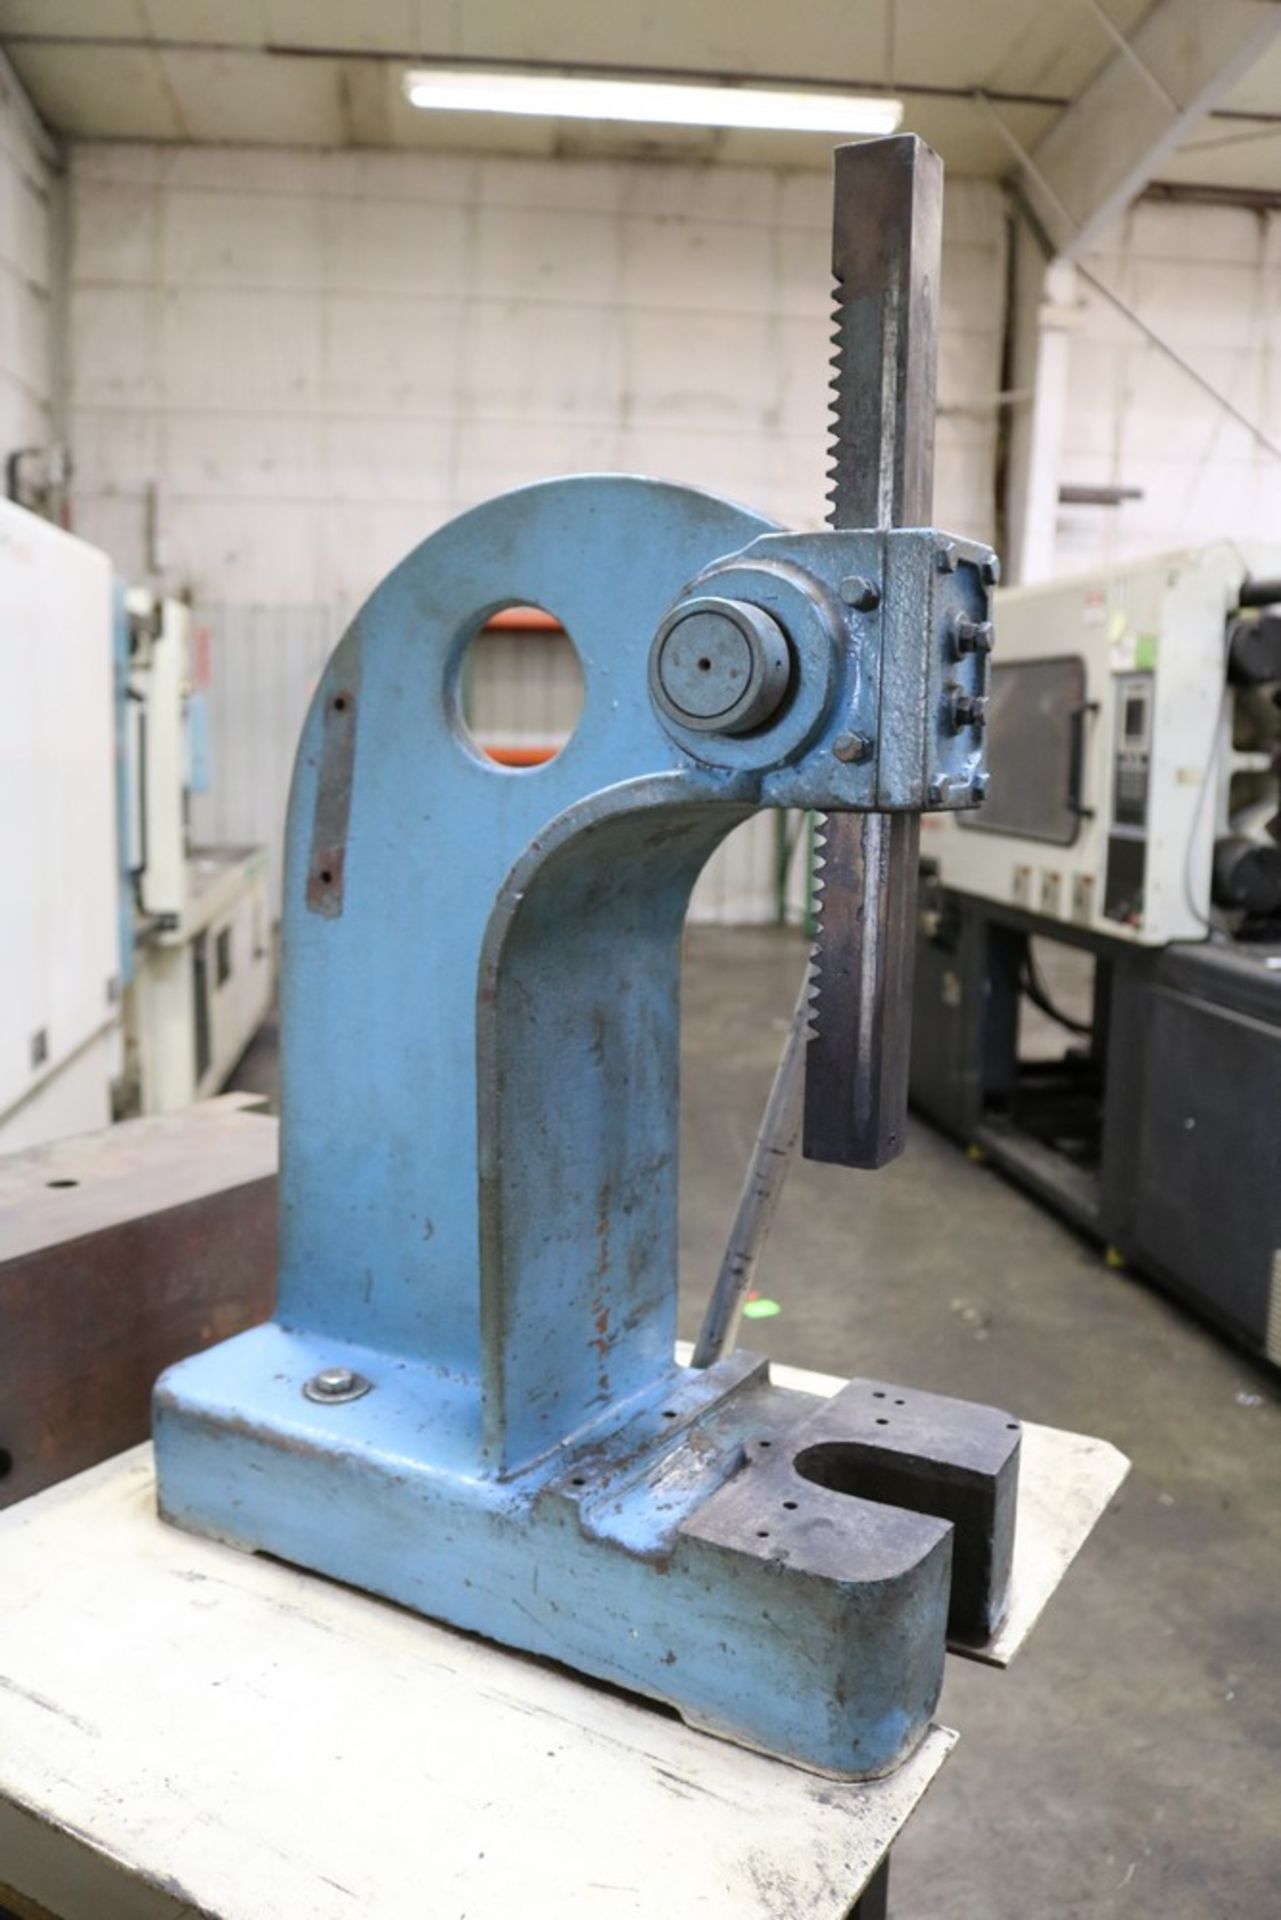 Heavy Duty 13" Arbor Press on Stand - Image 2 of 6